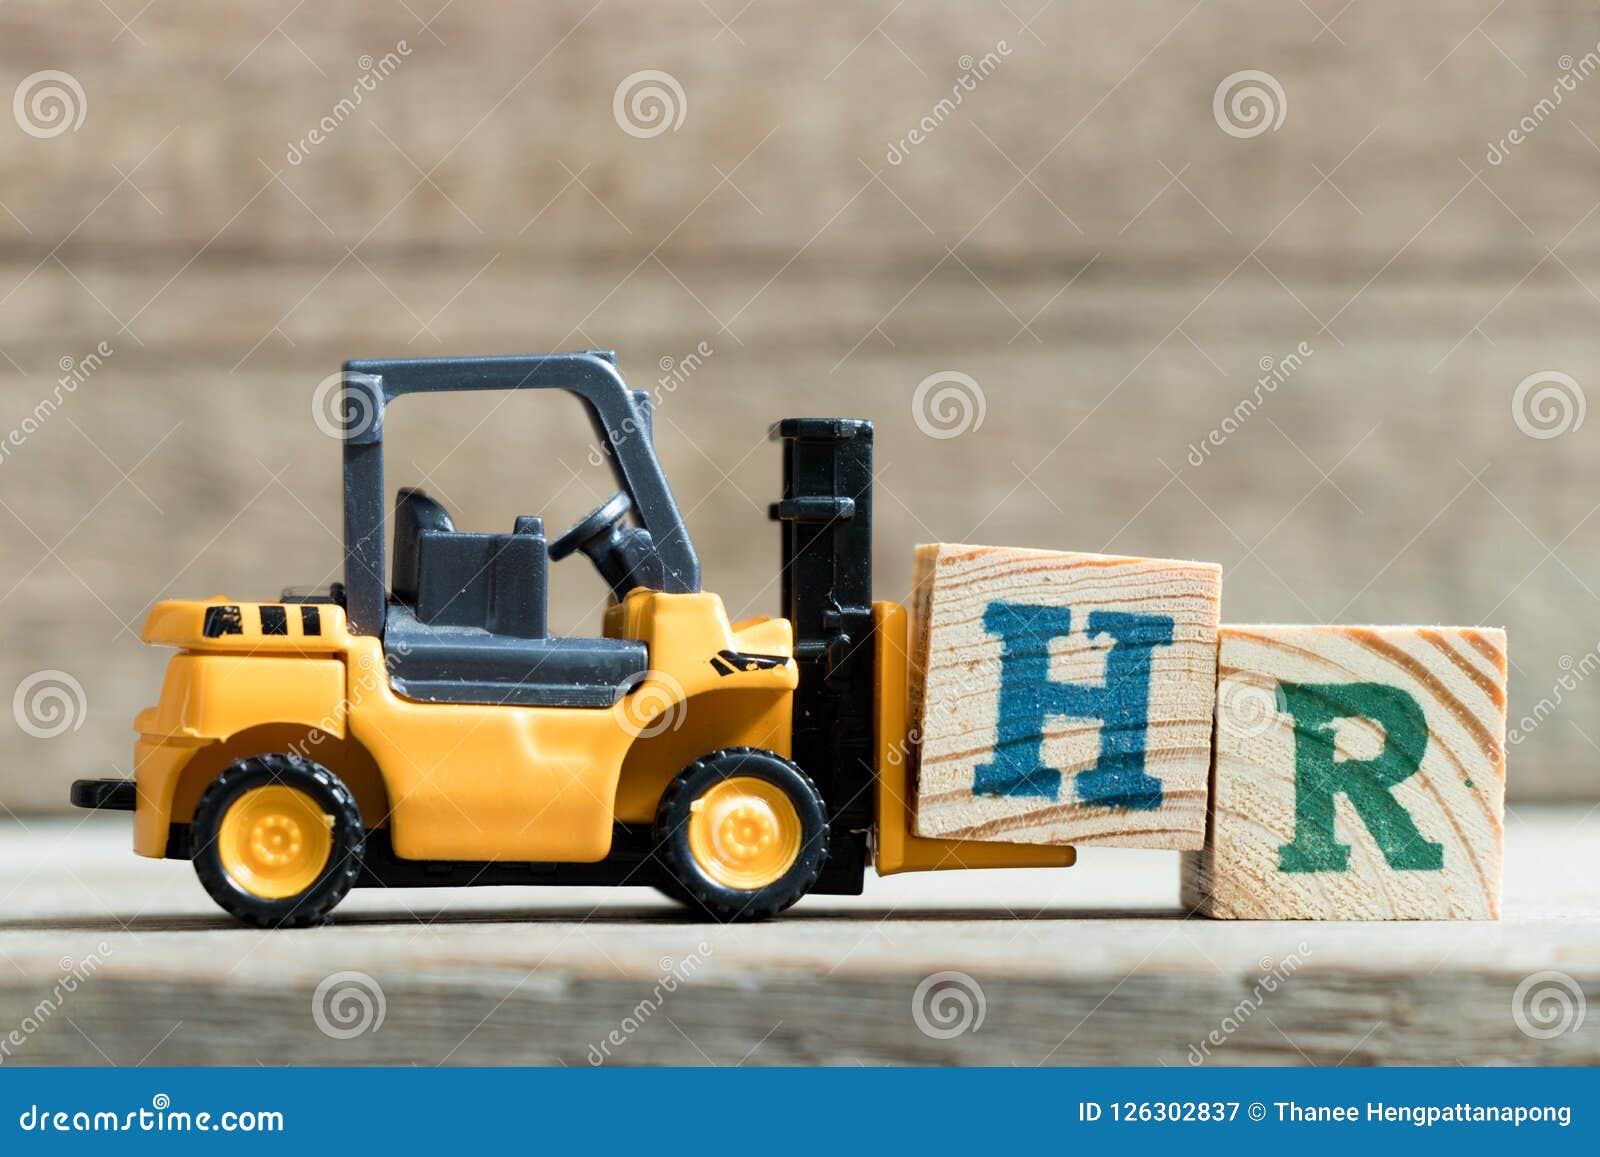 Toy Yellow Forklift Hold Letter Block H To Word Hr Stock Image Image Of Forklift Manager 126302837